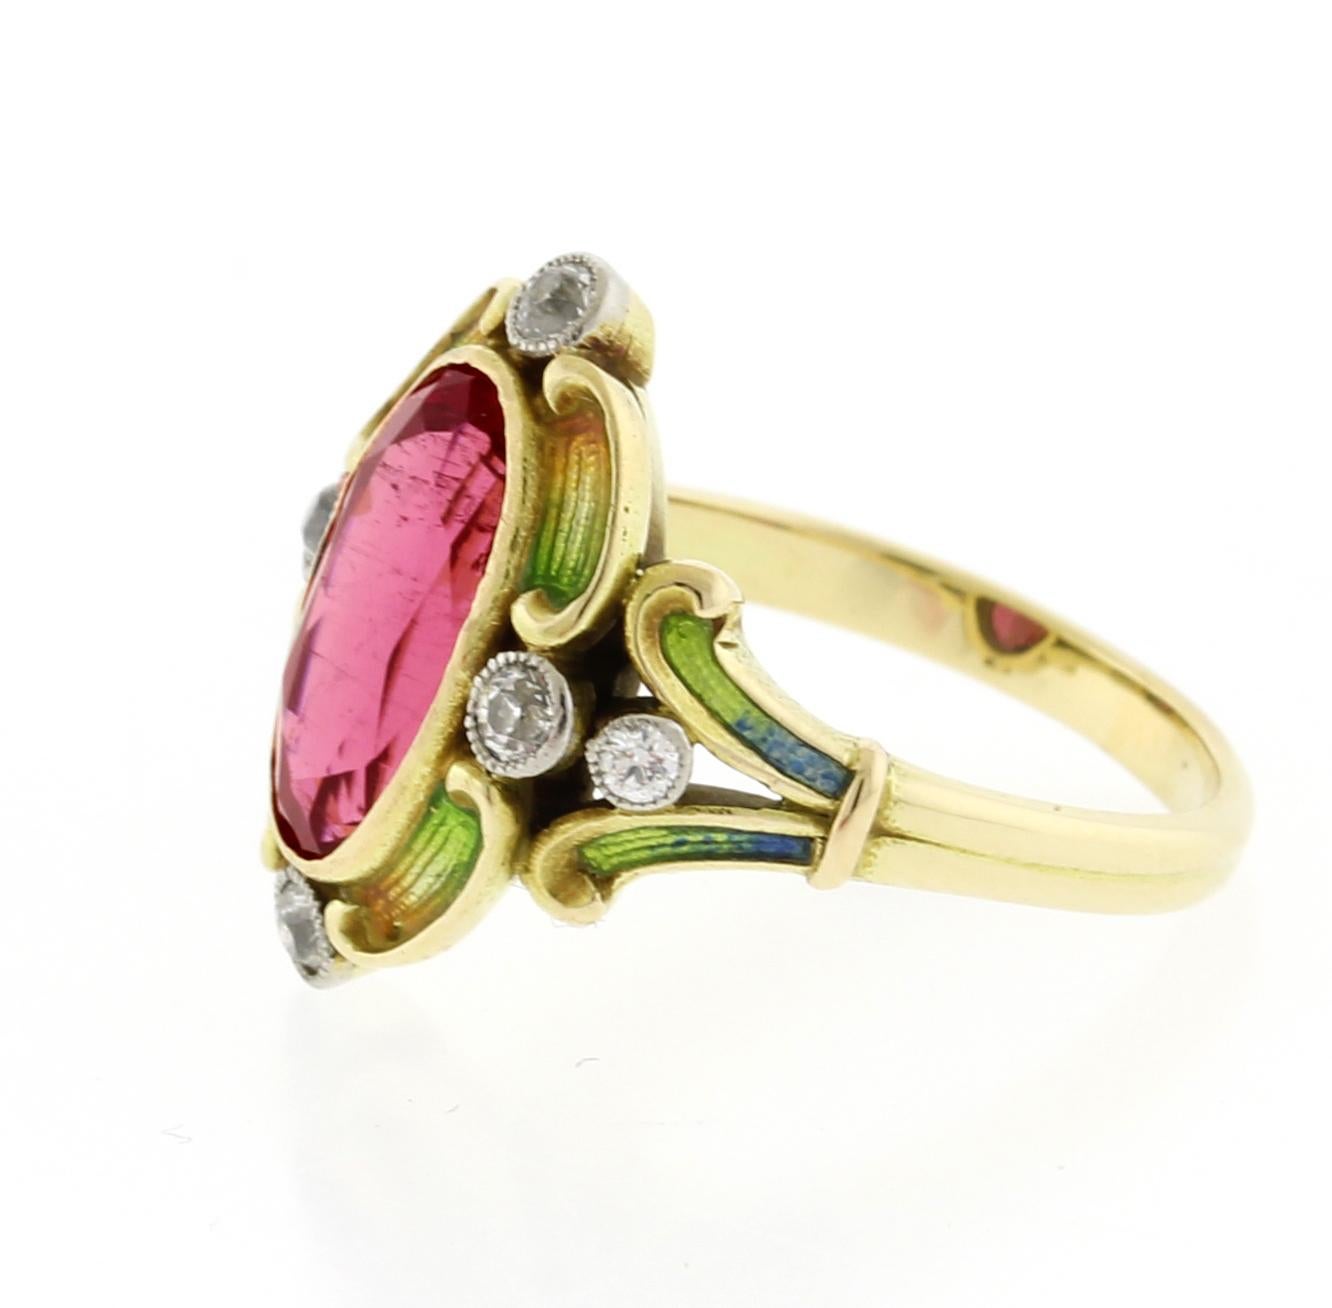 This 14kt yellow gold ring has orange, yellow, green and blue enamel.  
• Metal:14kt Yellow Gold
• Circa: 1890s
• Gemstone: Pink Tourmaline, 6 Diamonds
•Dimensions: Pink tourmaline- Approx. 11.1 x6.1 x4.25mm
• Size: 4.25
• Packaging: Pampillonia